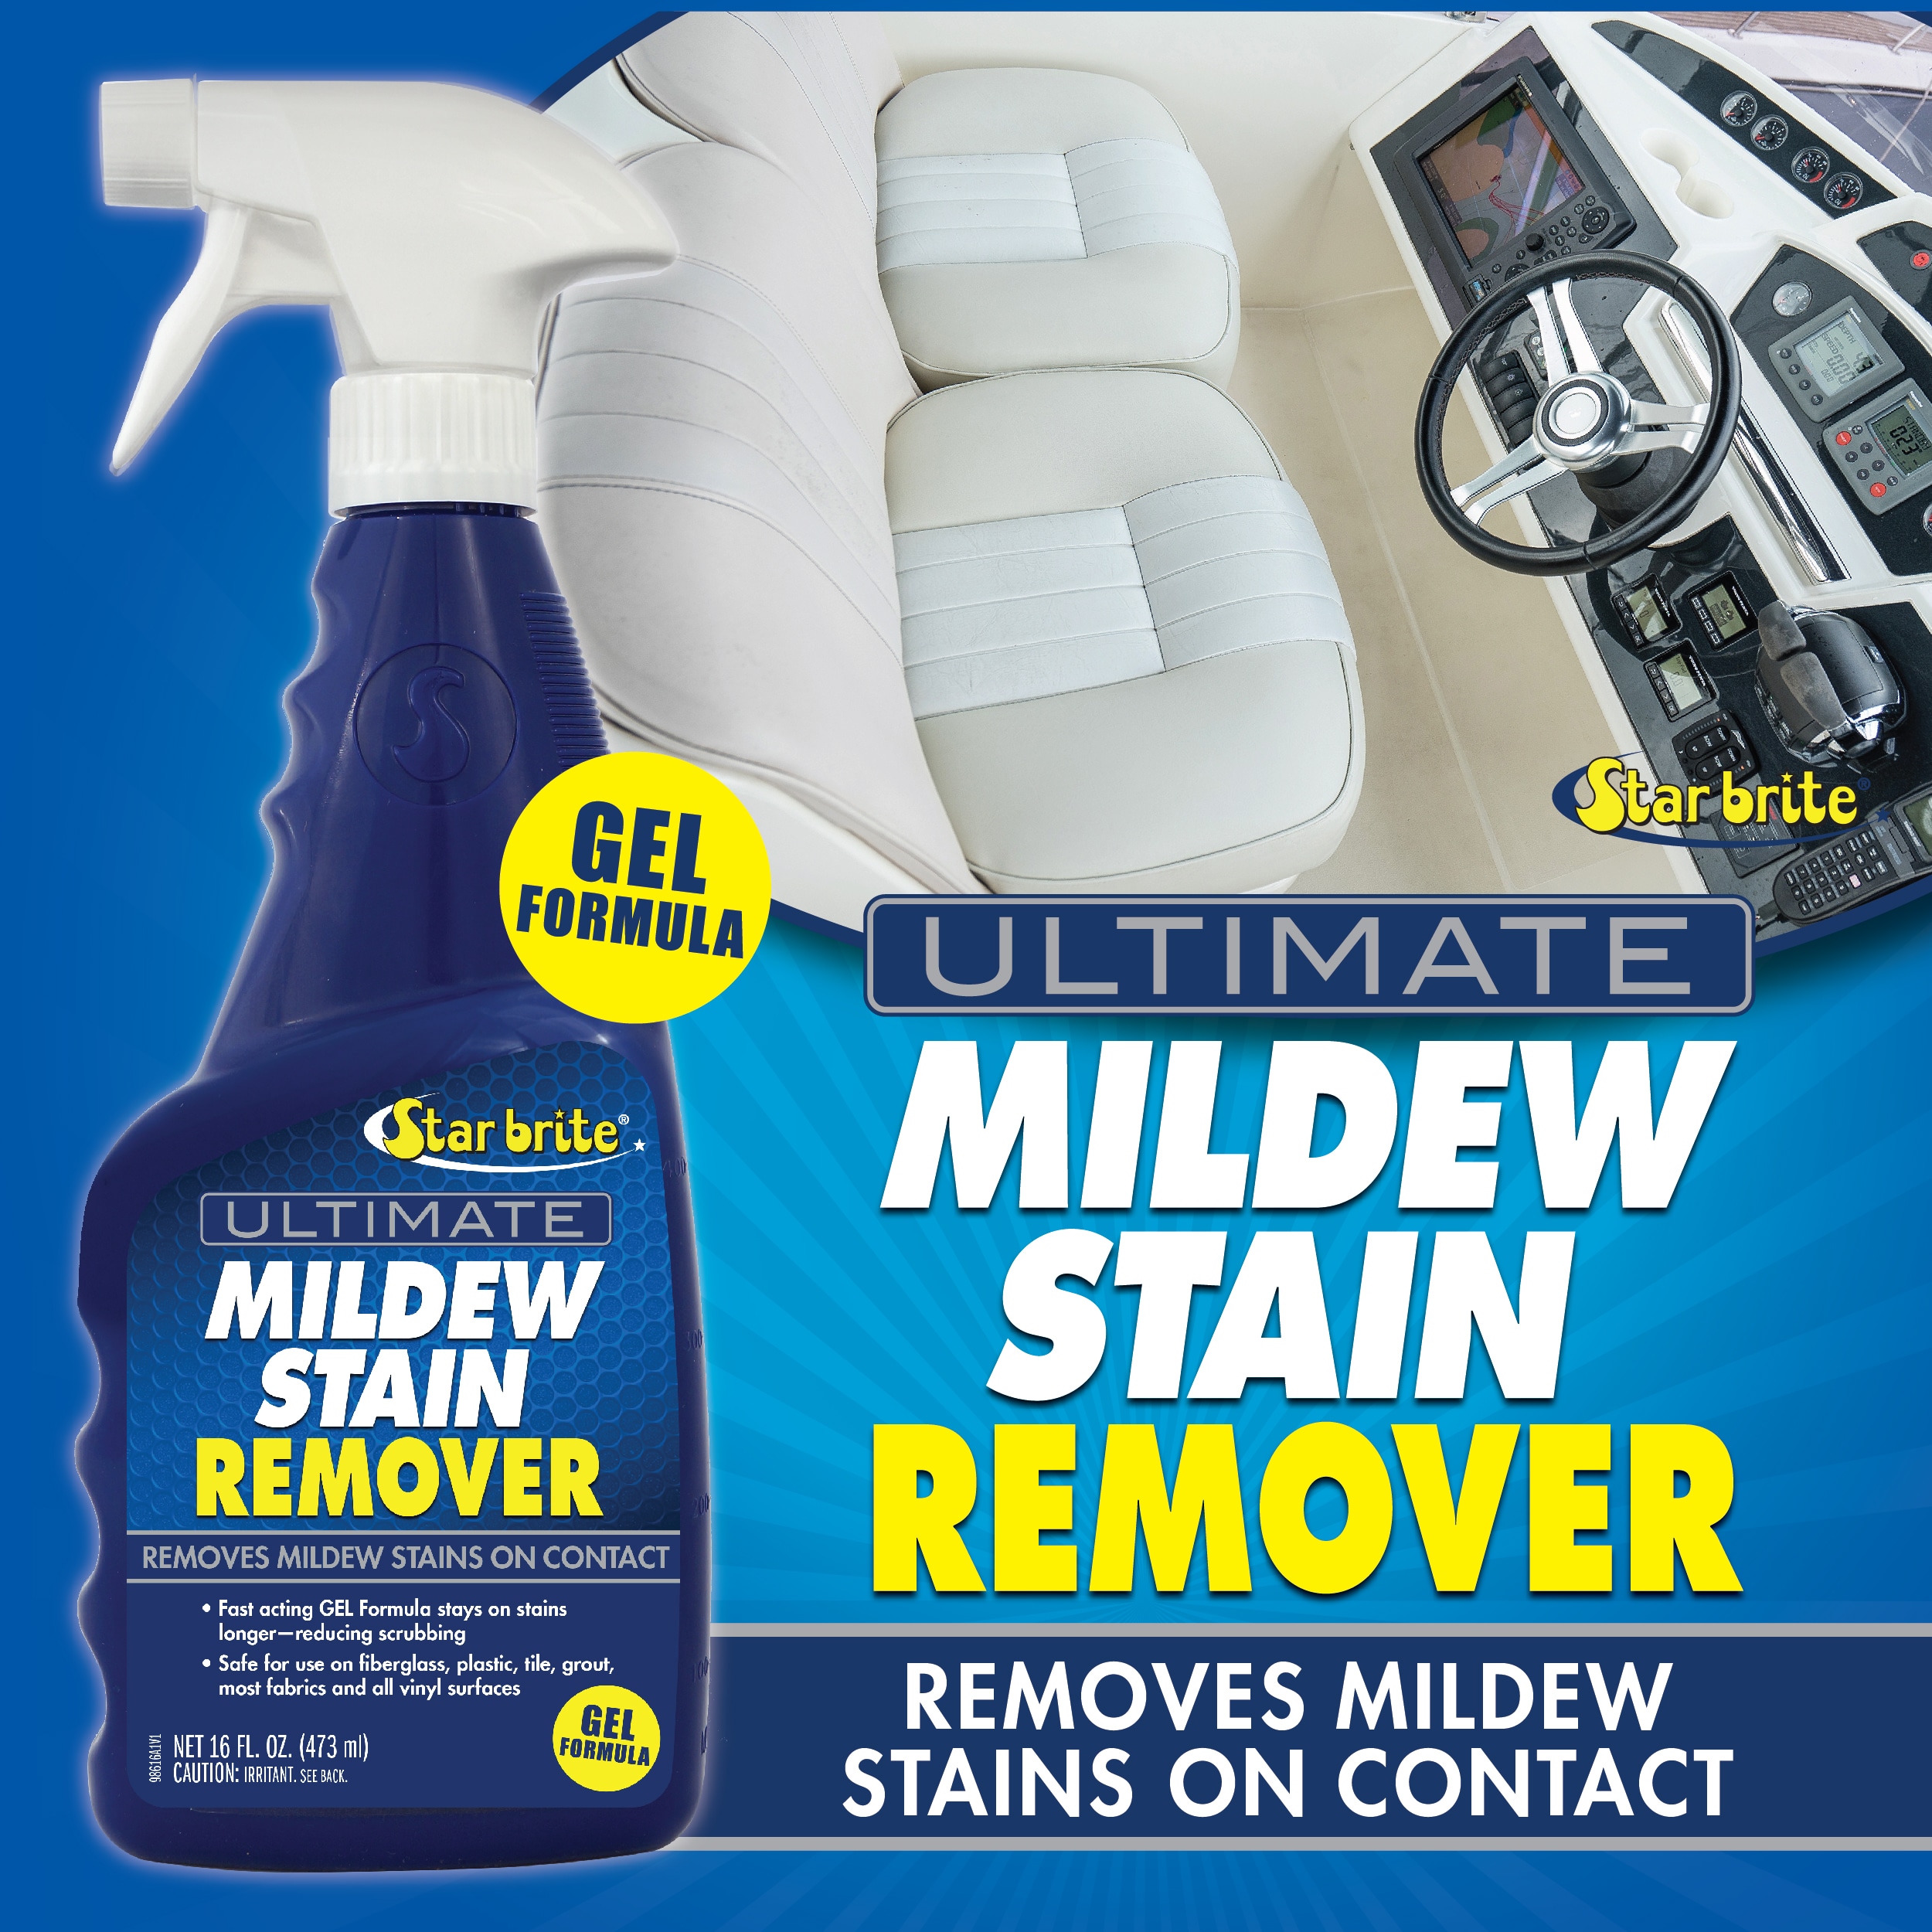 MB-9 Mold & Mildew Remover - Ready to Use Quart or Gallon Size